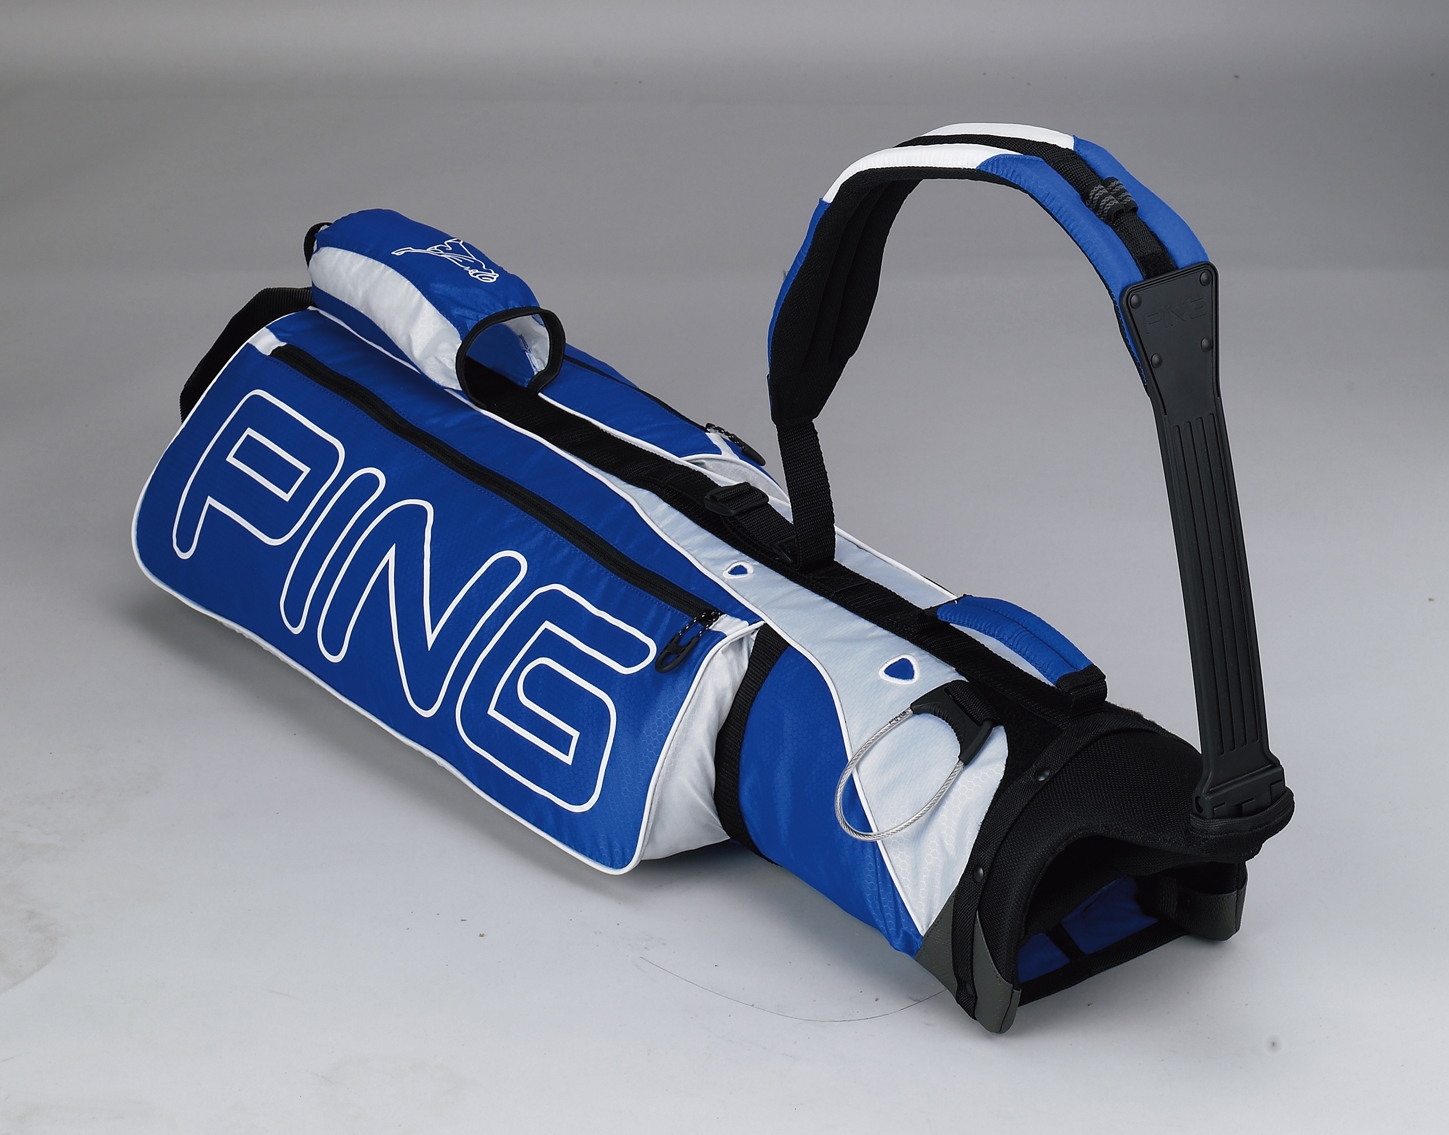 PING shines with Moon Lite upgrade